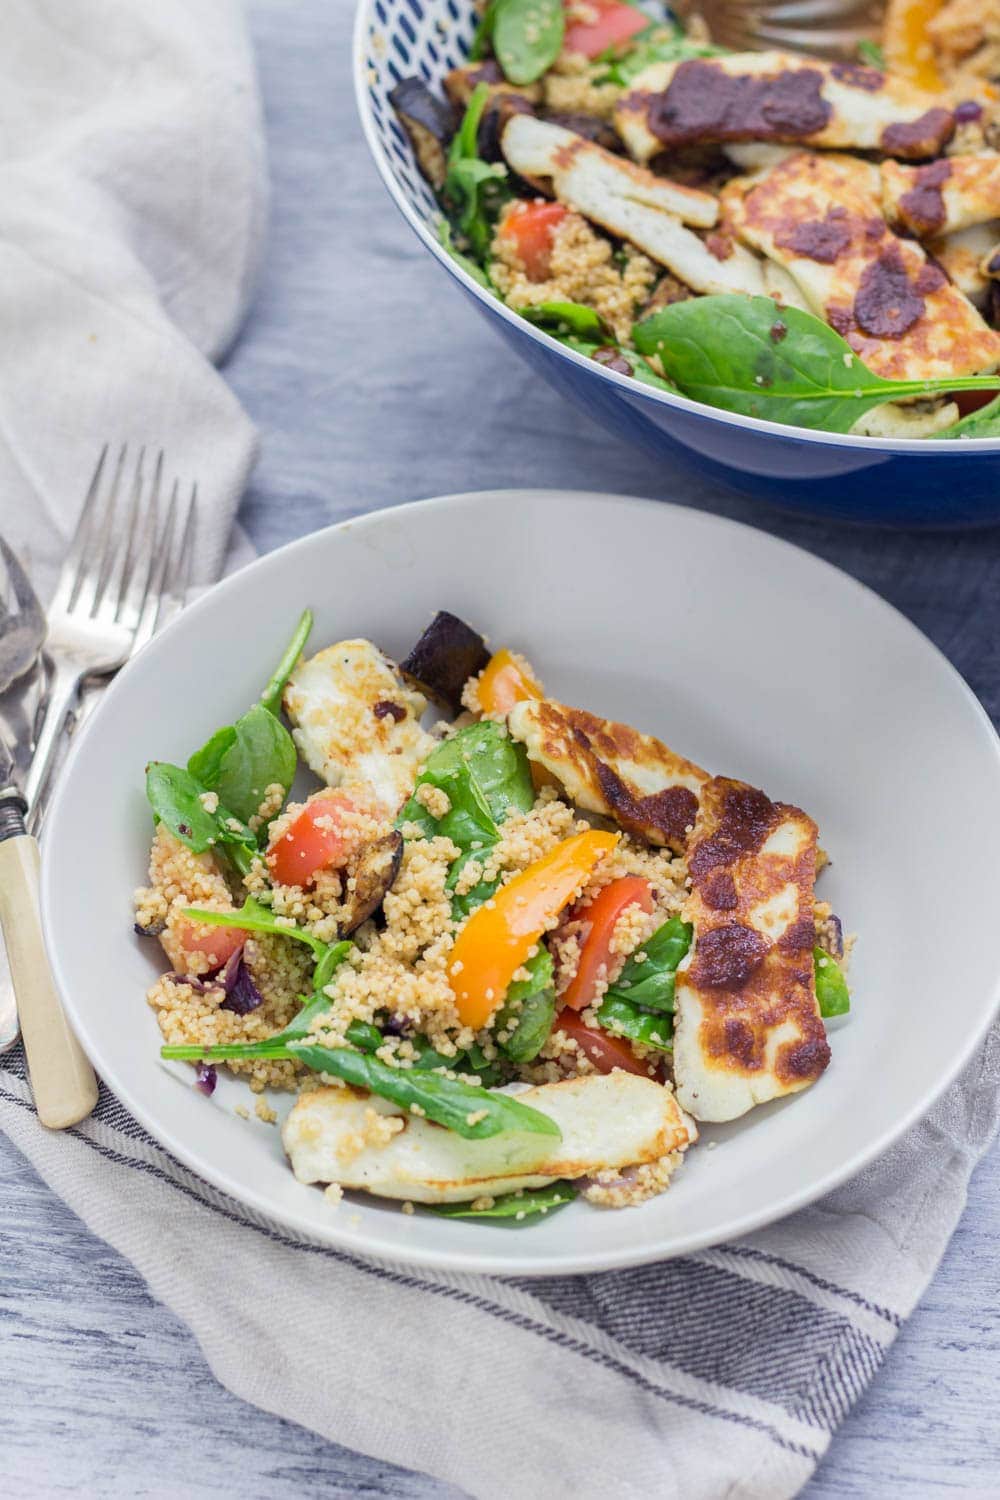 This harissa halloumi salad is so quick to make and is bursting with healthy ingredients! The salty halloumi is the perfect addition to this vegetarian dish. #vegetarian #salad #healthy #halloumi